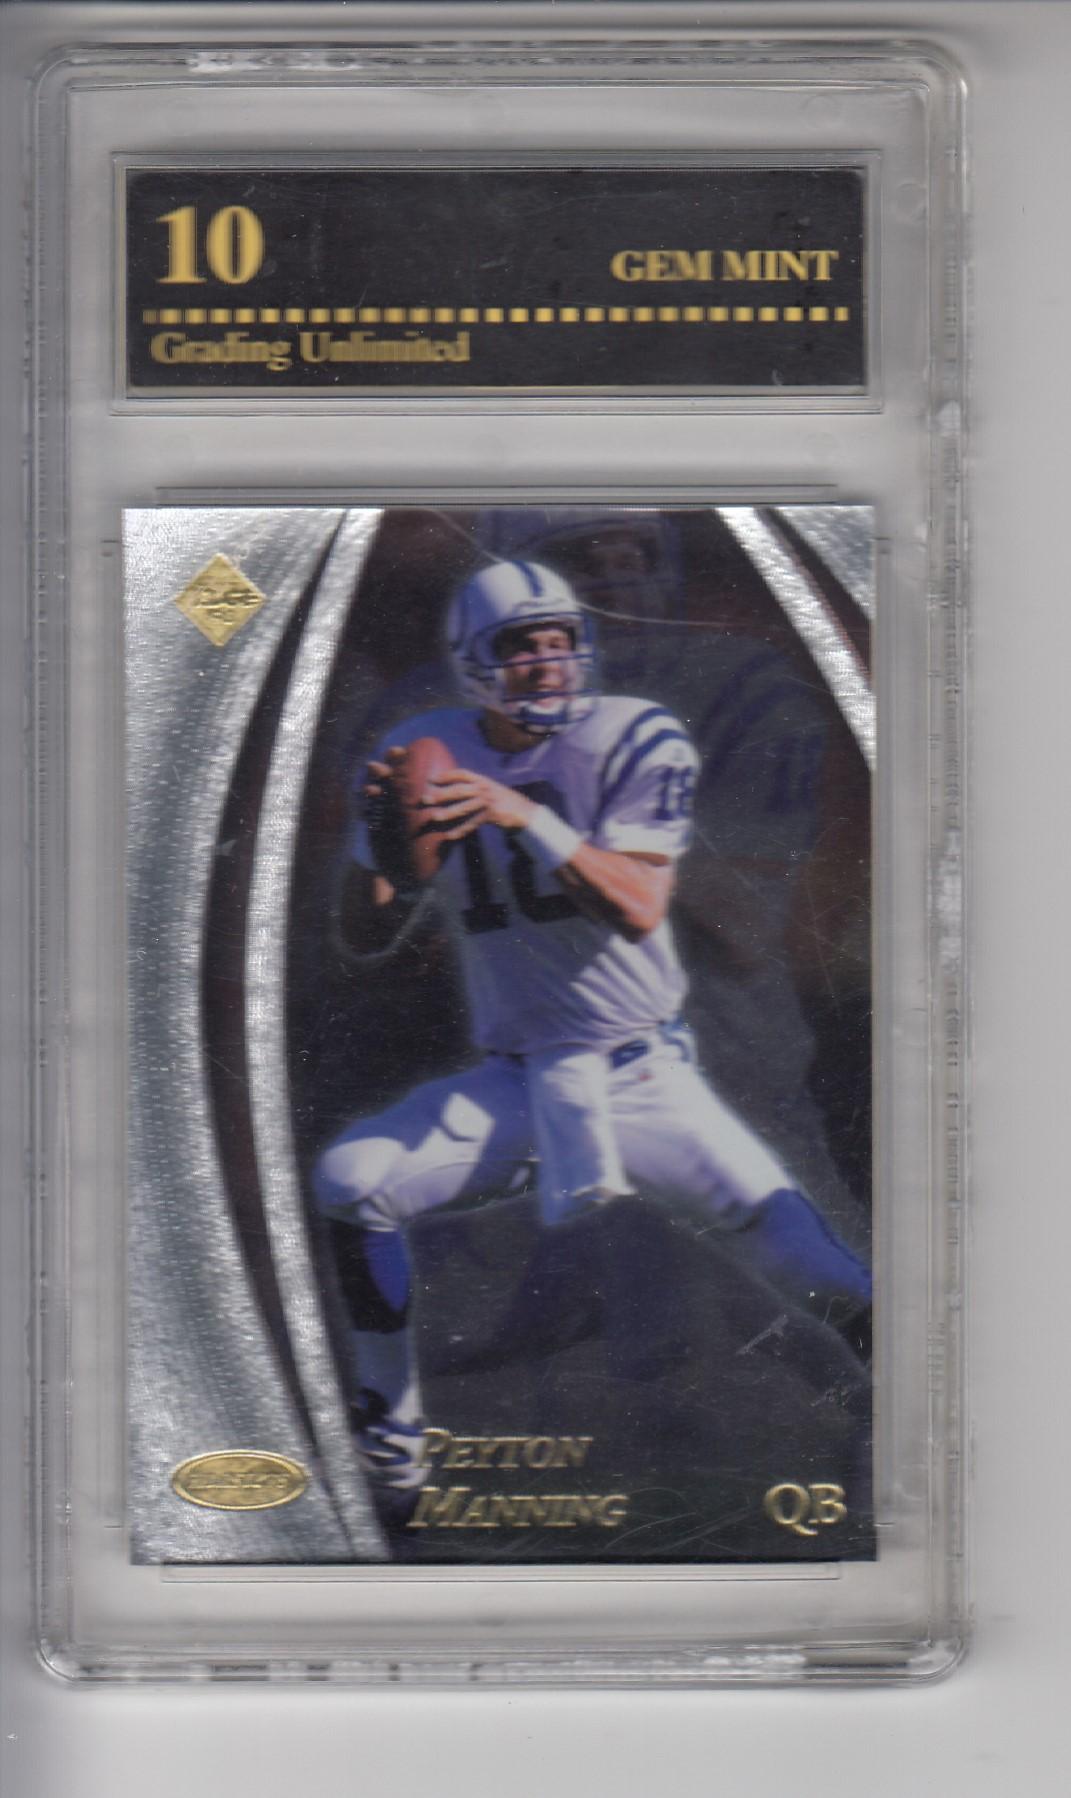 PEYTON MANNING 1998 COLLECTORS EDGE MASTERS ROOKIE CARD / GRADED